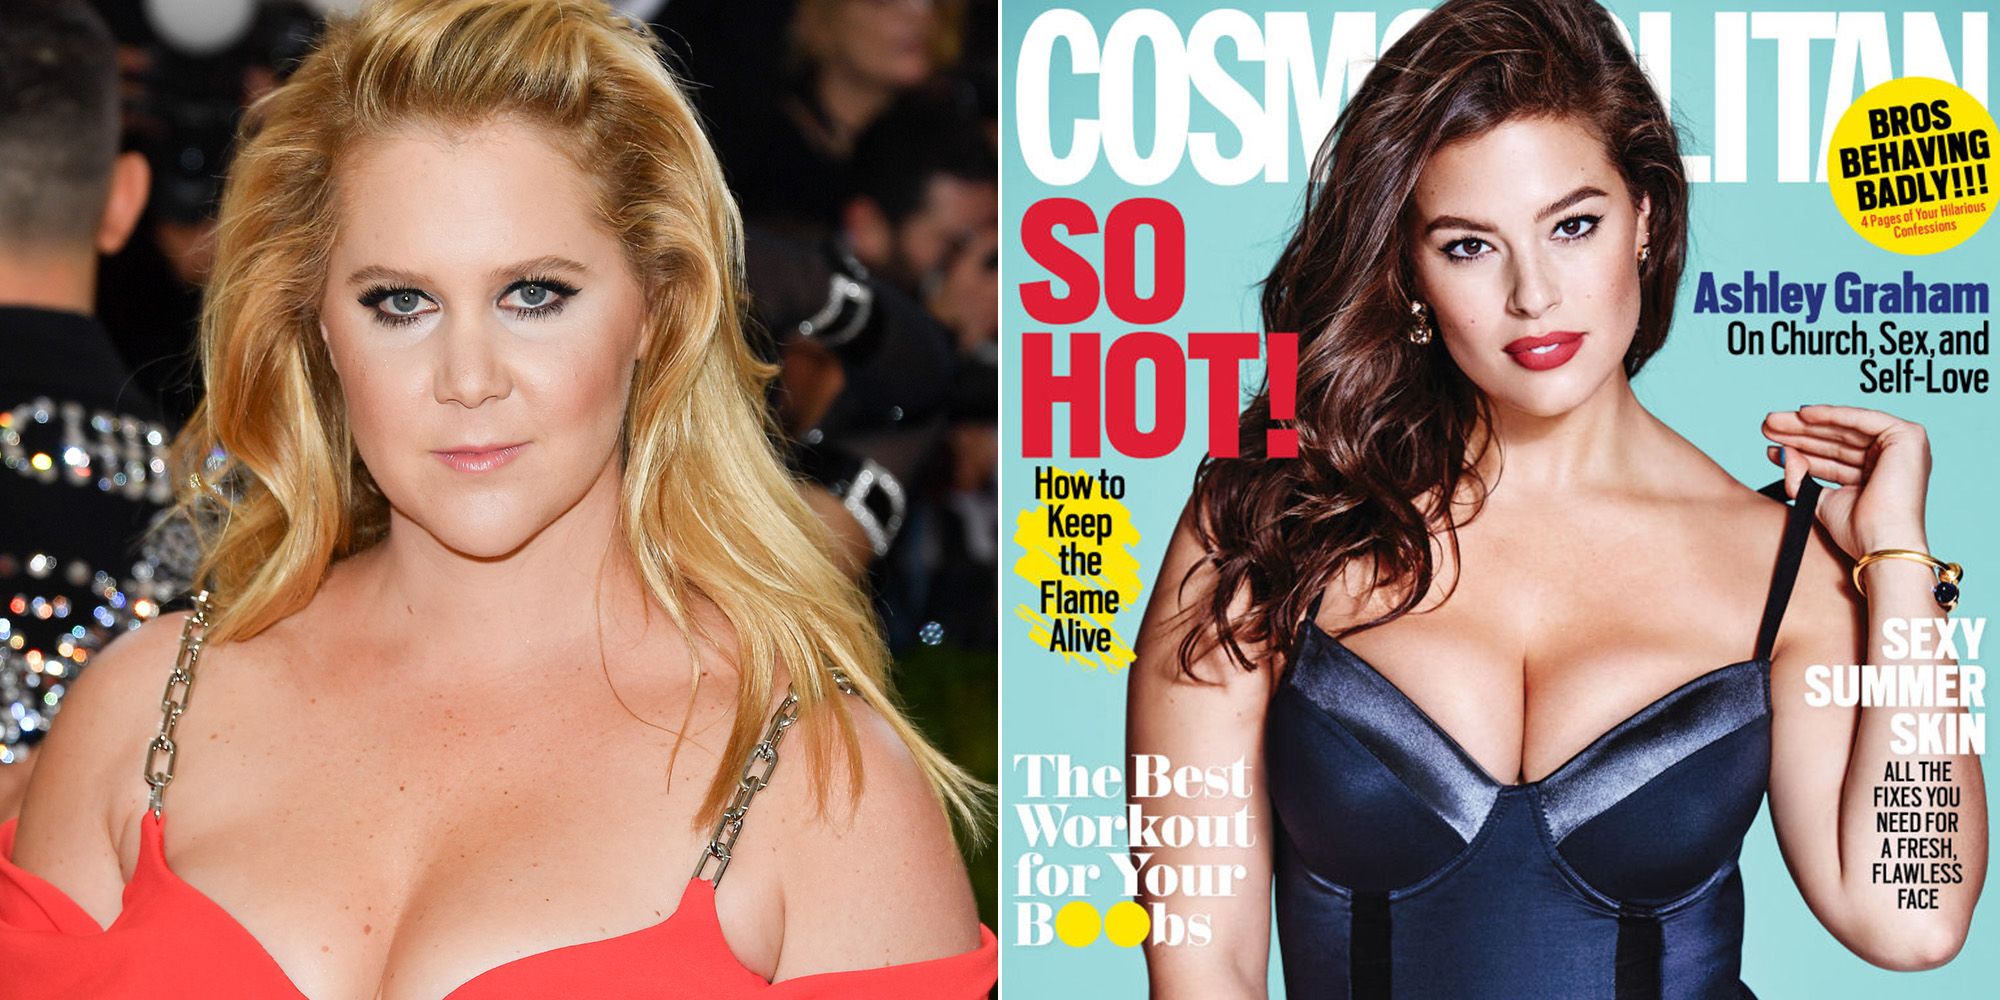 Ashley Graham's Cosmopolitan cover: Thoughts on Amy Schumer, 'plus-size'  and more